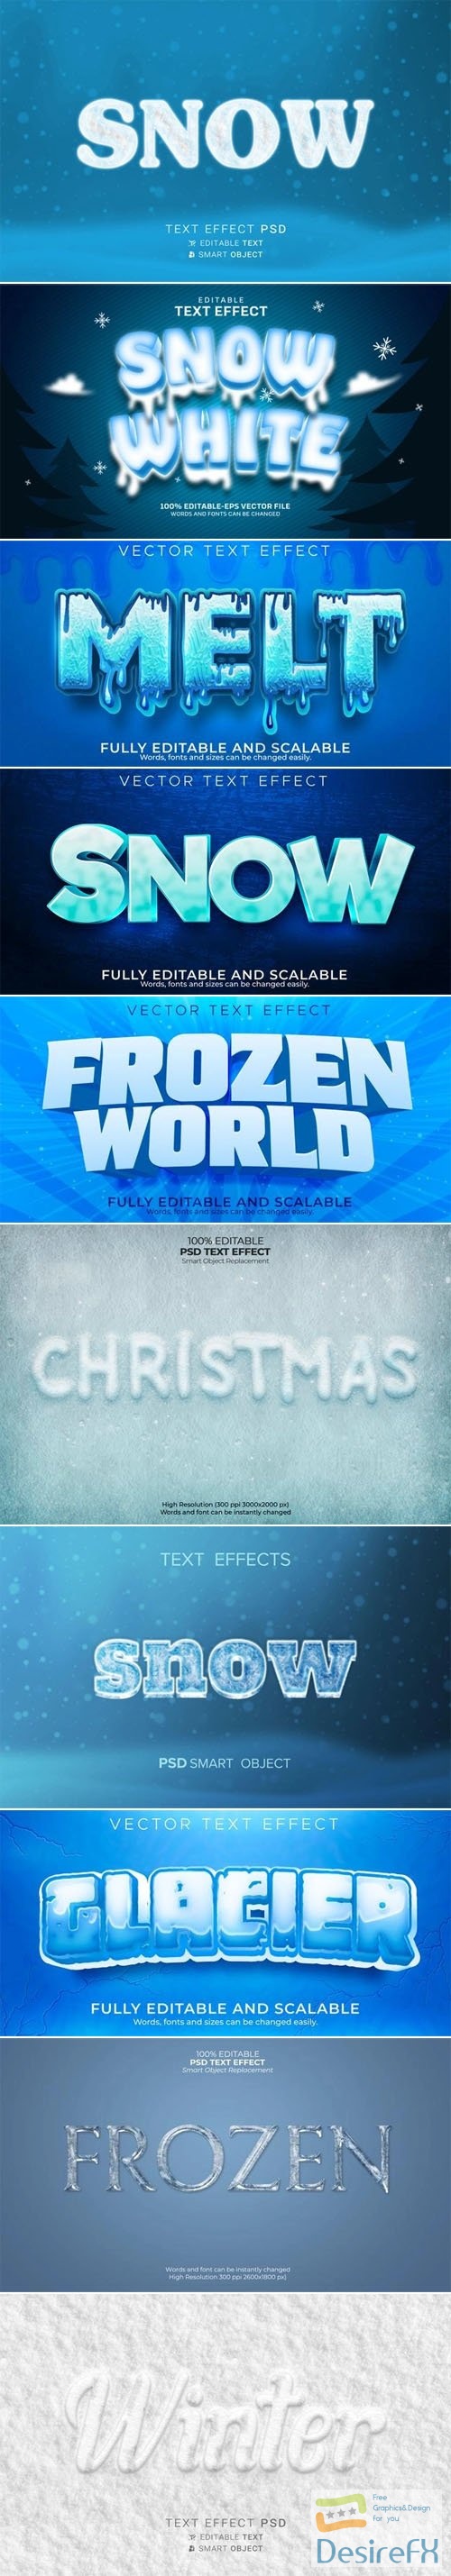 10 Snowy and Frozen Text Effects for Photoshop and Illustrator